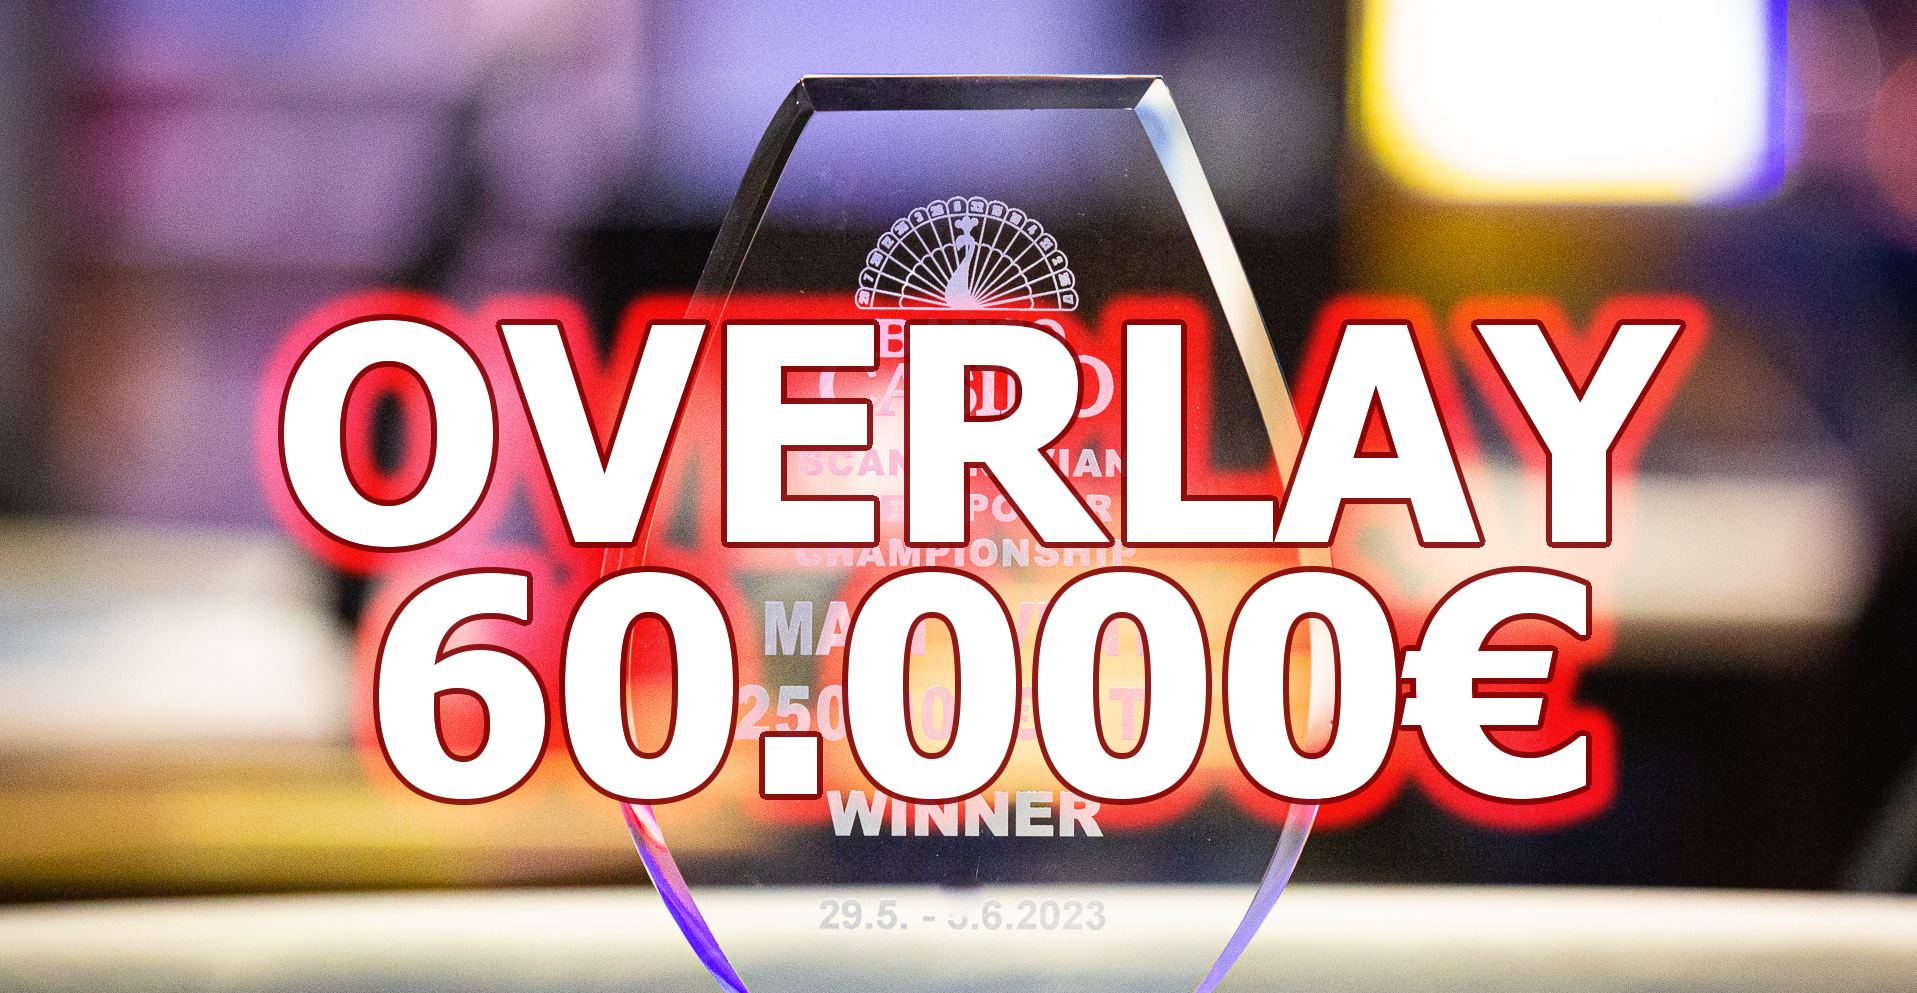 The casino pays 60,000€ to the SOPC Main Event - the last chance to advance starts at 10:00 a.m.!